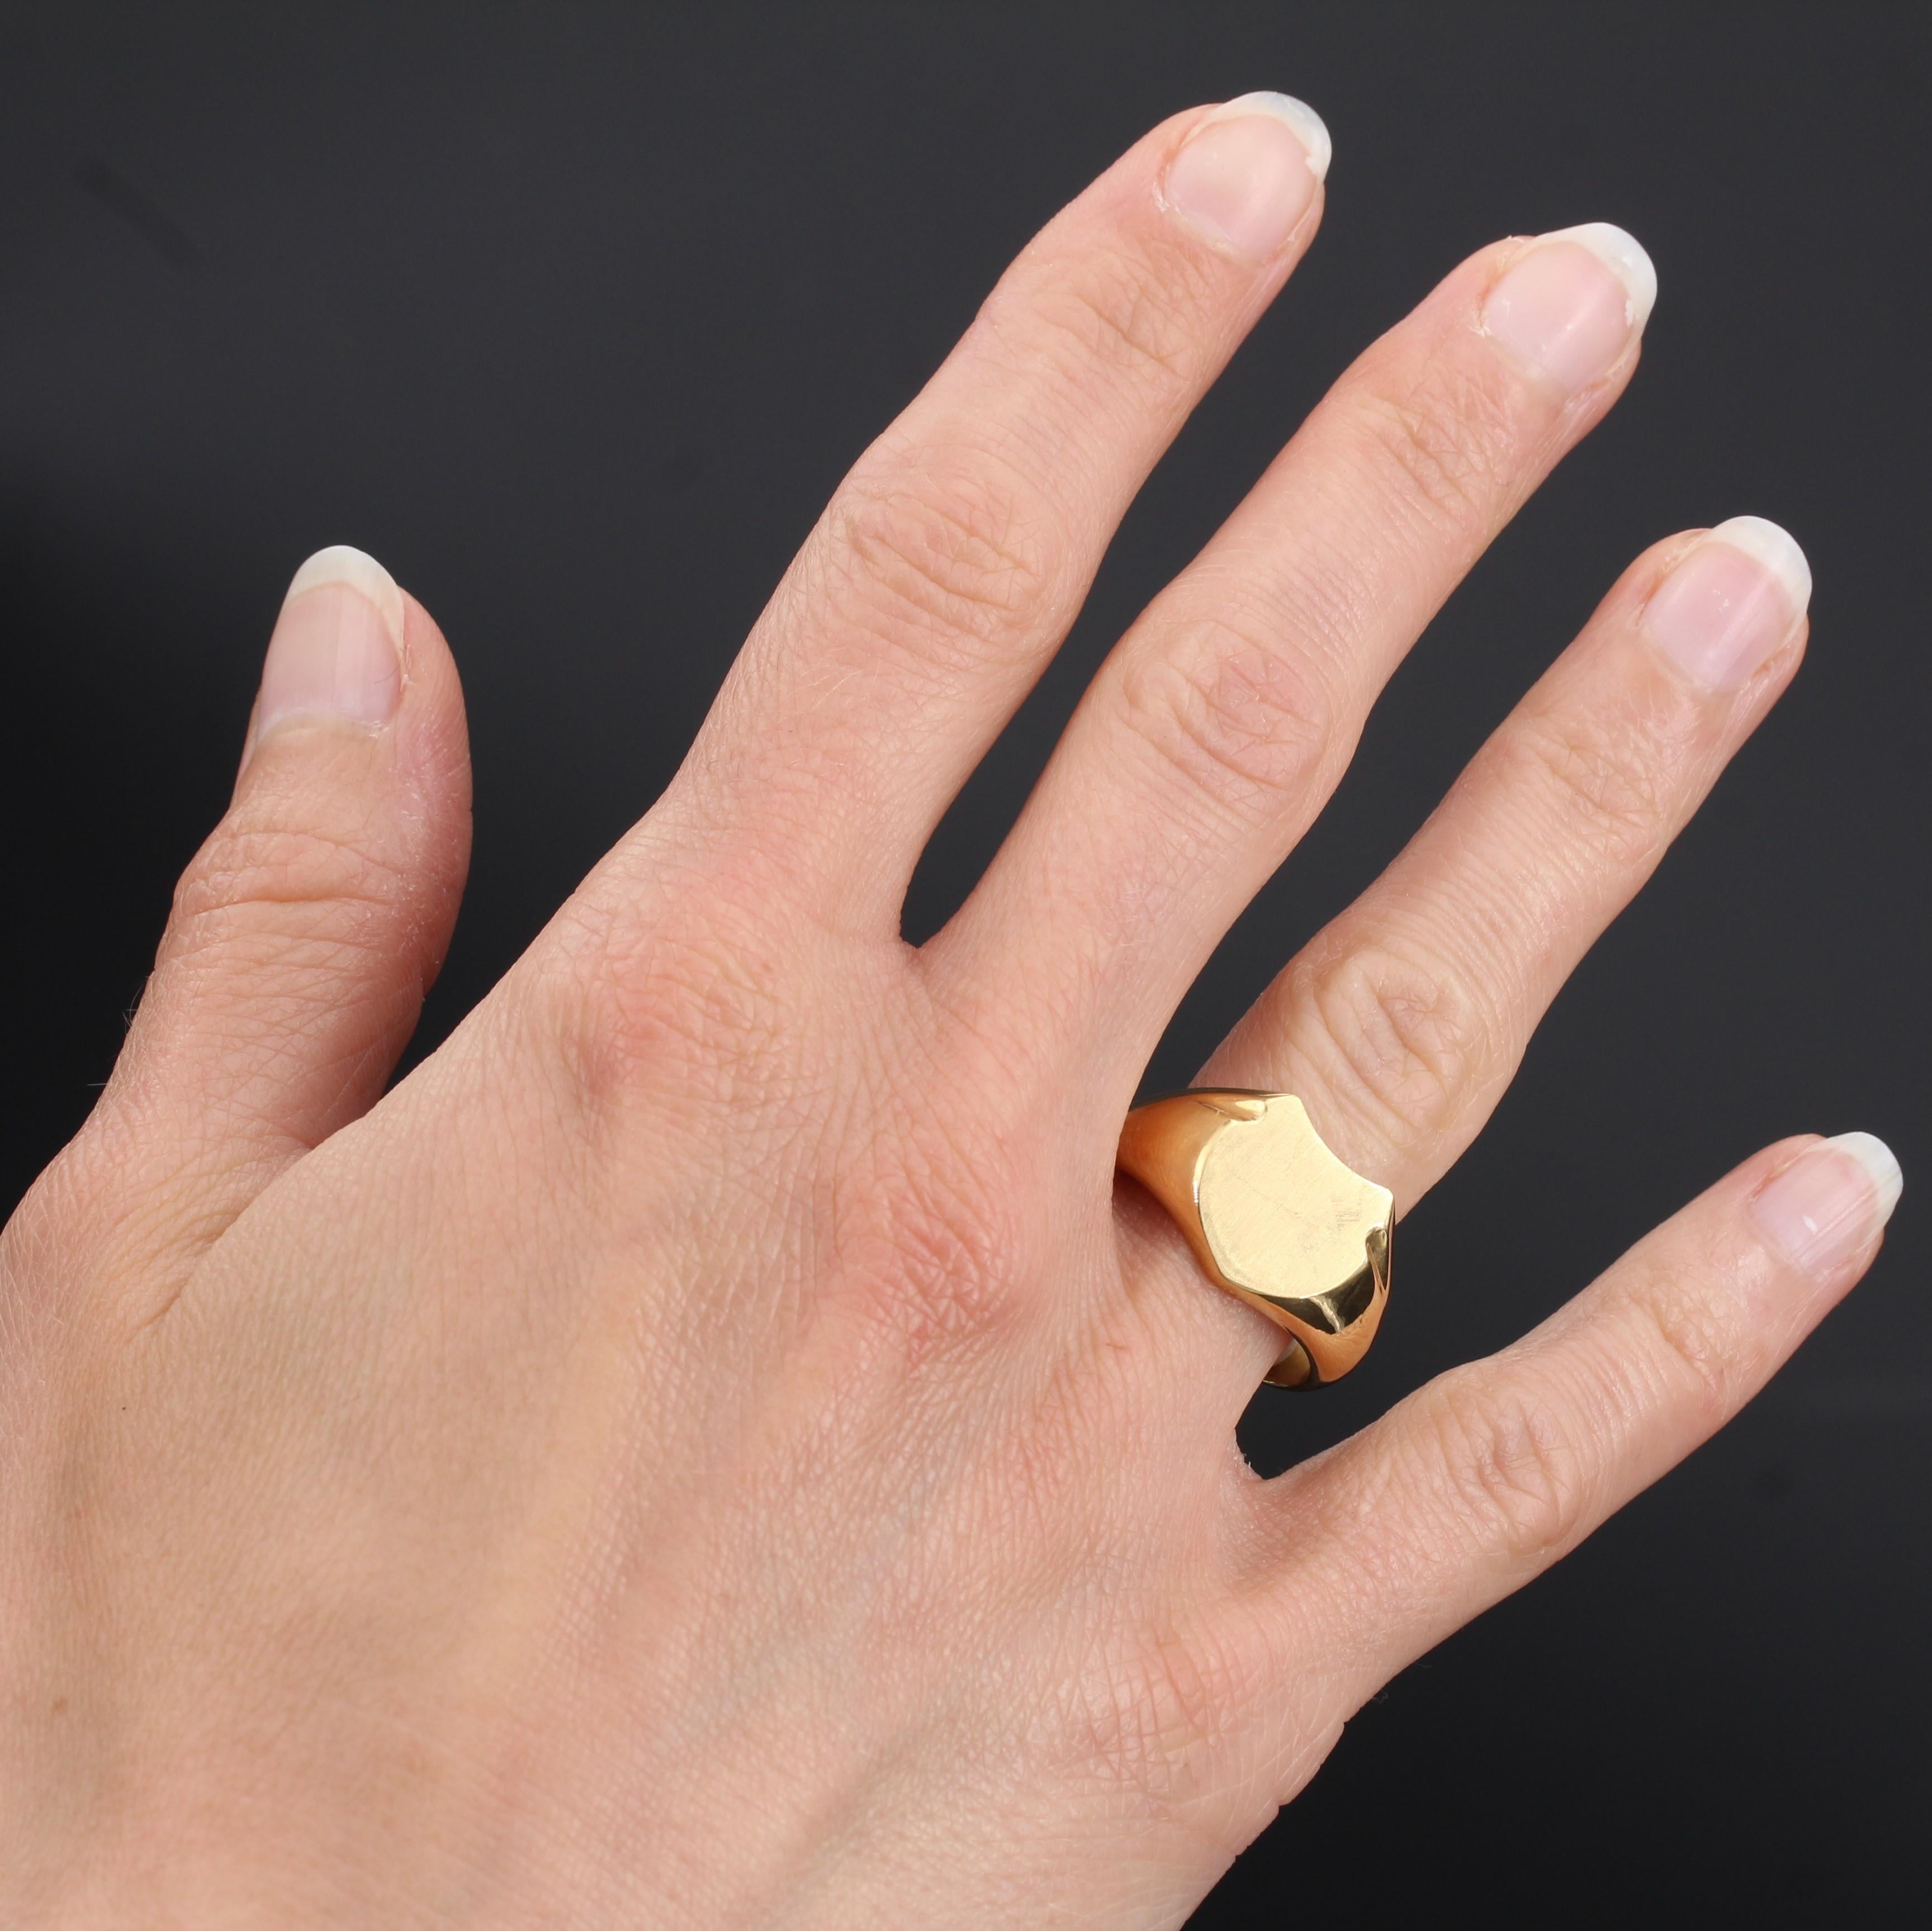 Ring in 18 carats yellow gold, eagle's head hallmark.
Splendid art deco signet ring, it is formed of a smooth plate in coat of arms shape which is extended by a broad domed ring.
Height: 13.4 mm, width: 13 mm, thickness 1.8 mm, width of the ring: